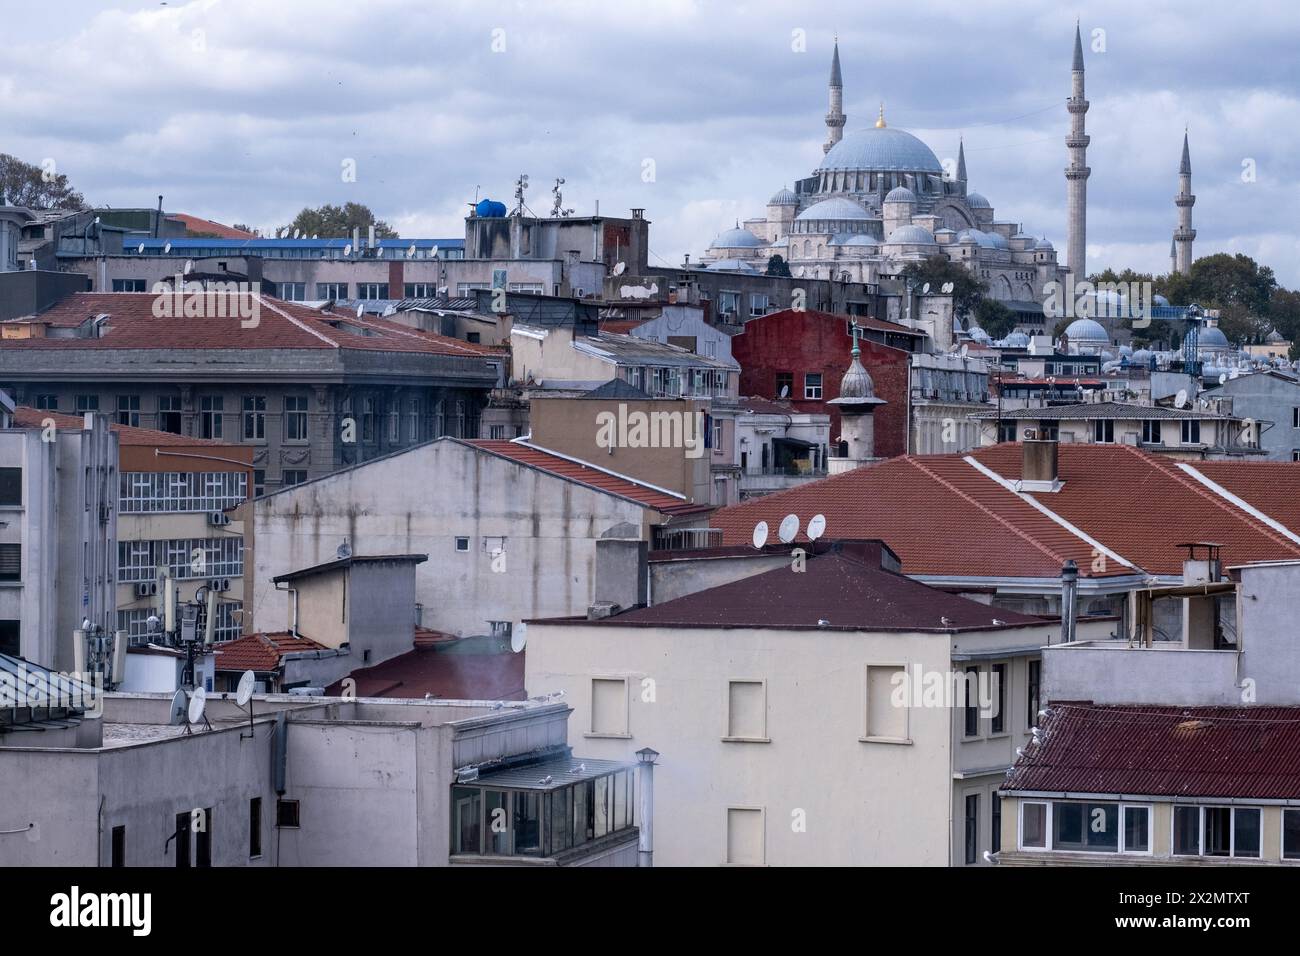 A cityscape of residential buildings and the Suleymaniye Mosque in Istanbul, Turkey's largest city on the Bosphorus strait in the Marmara region, on 1 Stock Photo